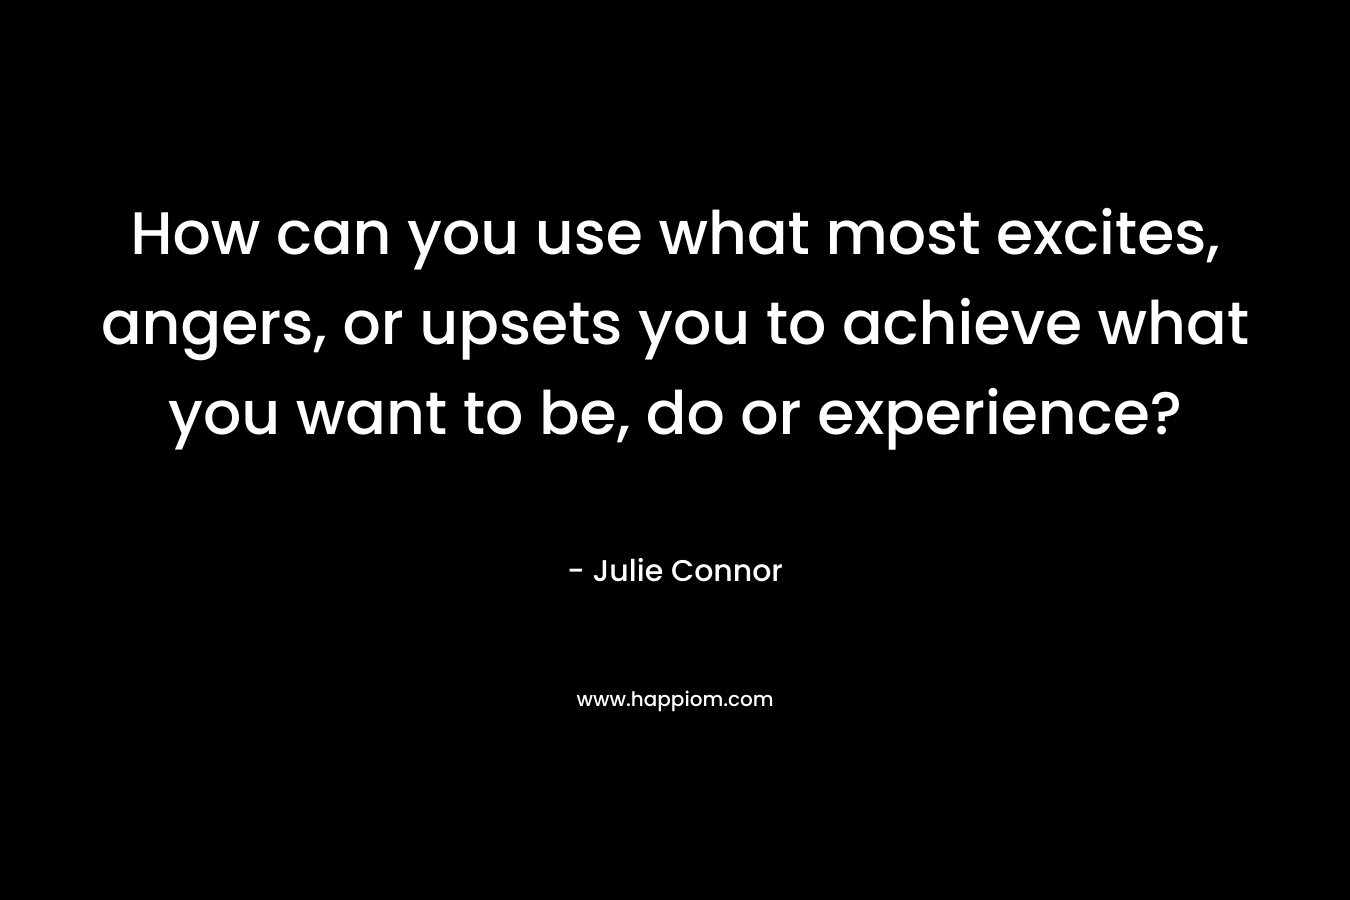 How can you use what most excites, angers, or upsets you to achieve what you want to be, do or experience? – Julie Connor